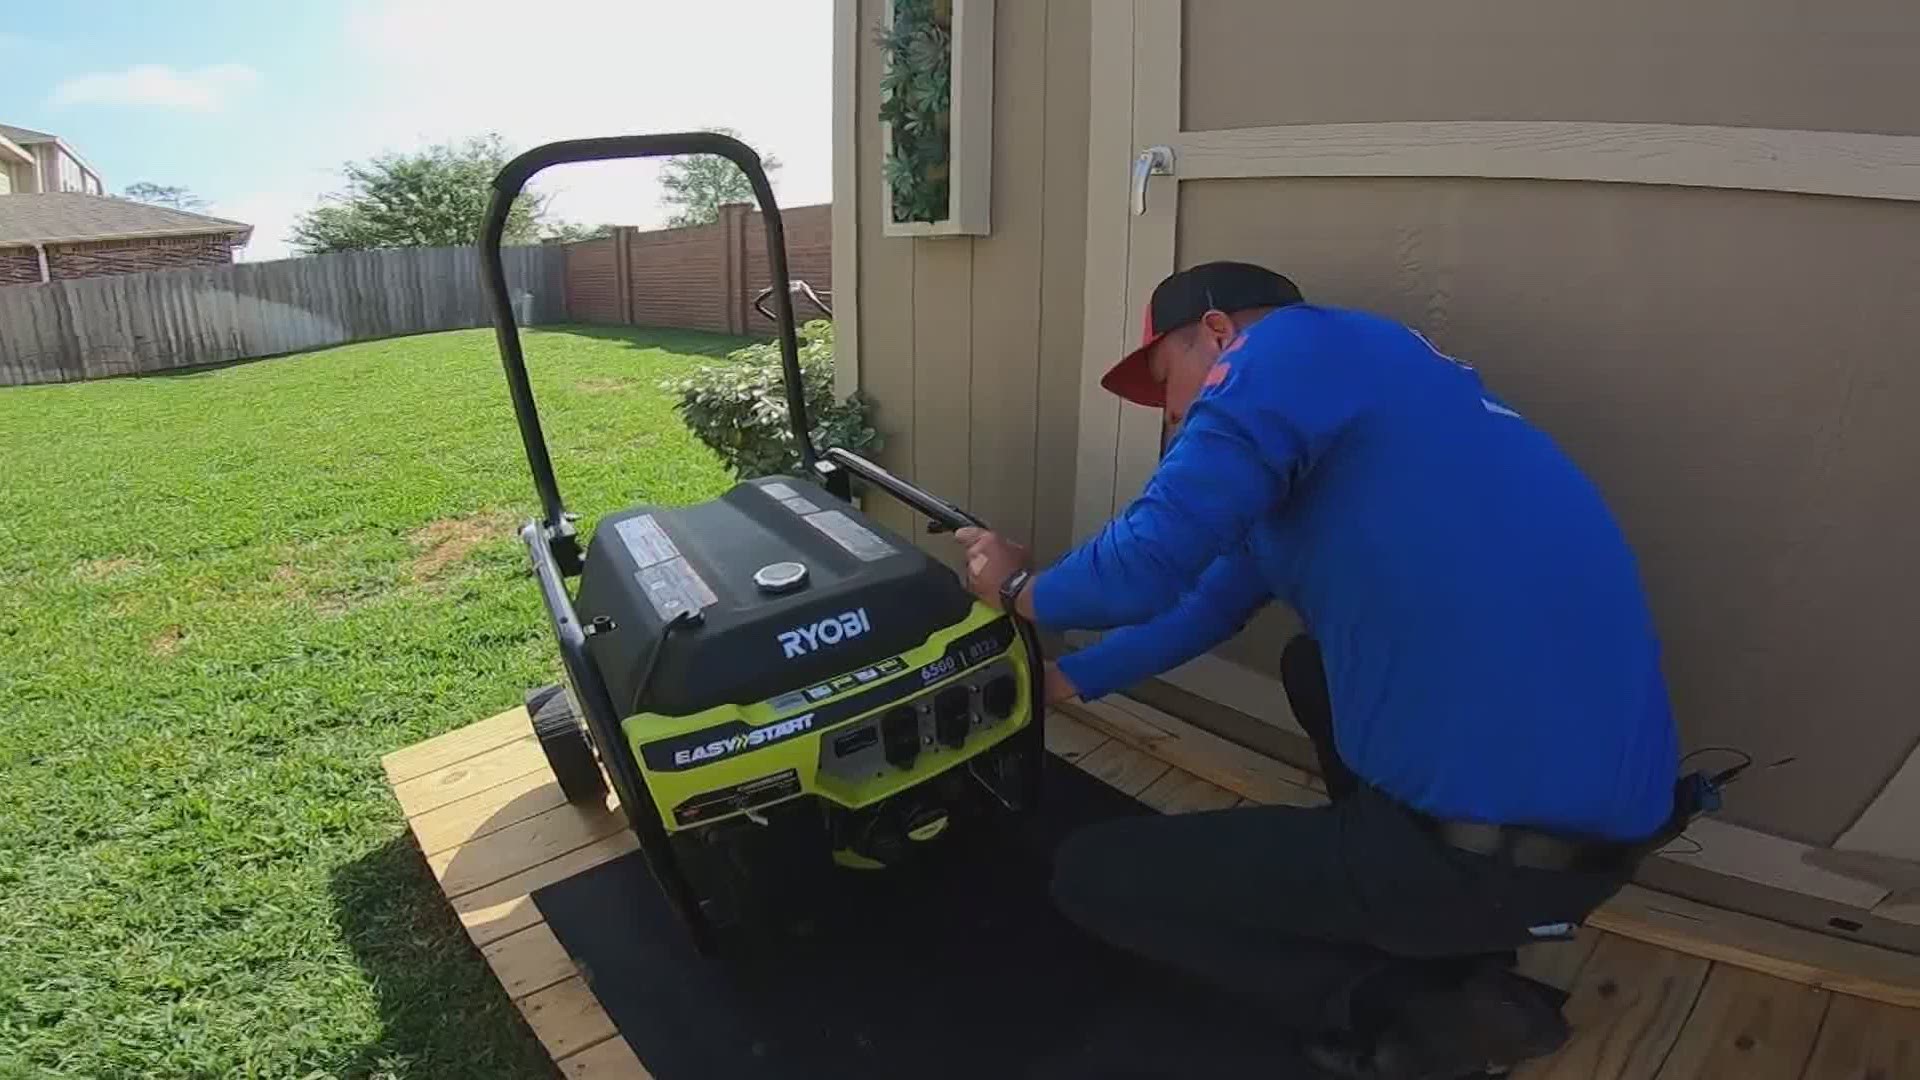 KHOU11's Michelle Choi has a few of the pros and cons when it comes to buying a power generator for your home.